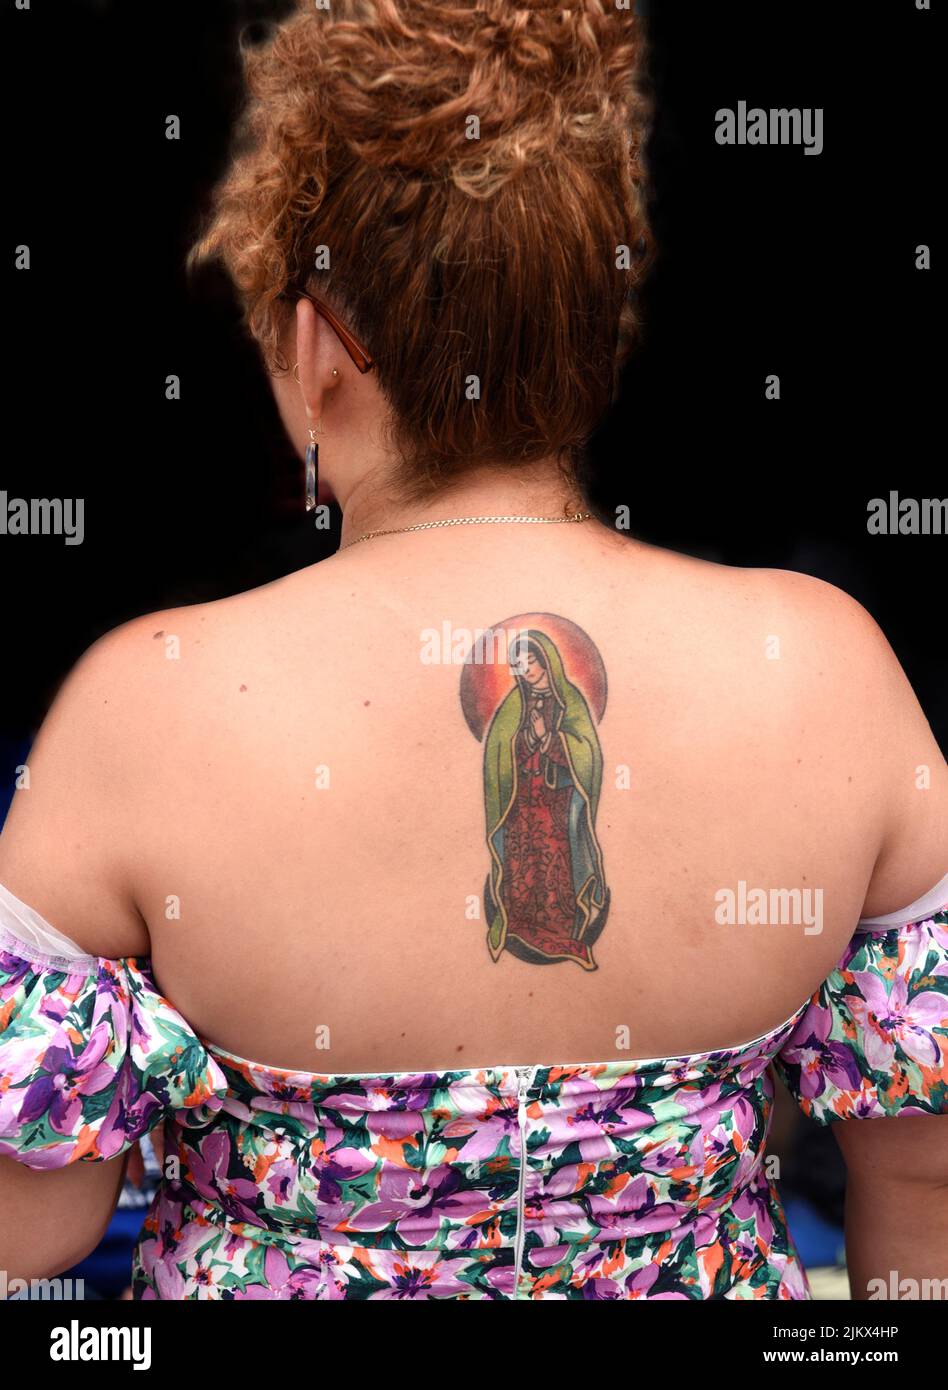 A woman with a tattoo of Our Lady of Guadalupe on her back in Santa Fe, New Mexico. Stock Photo